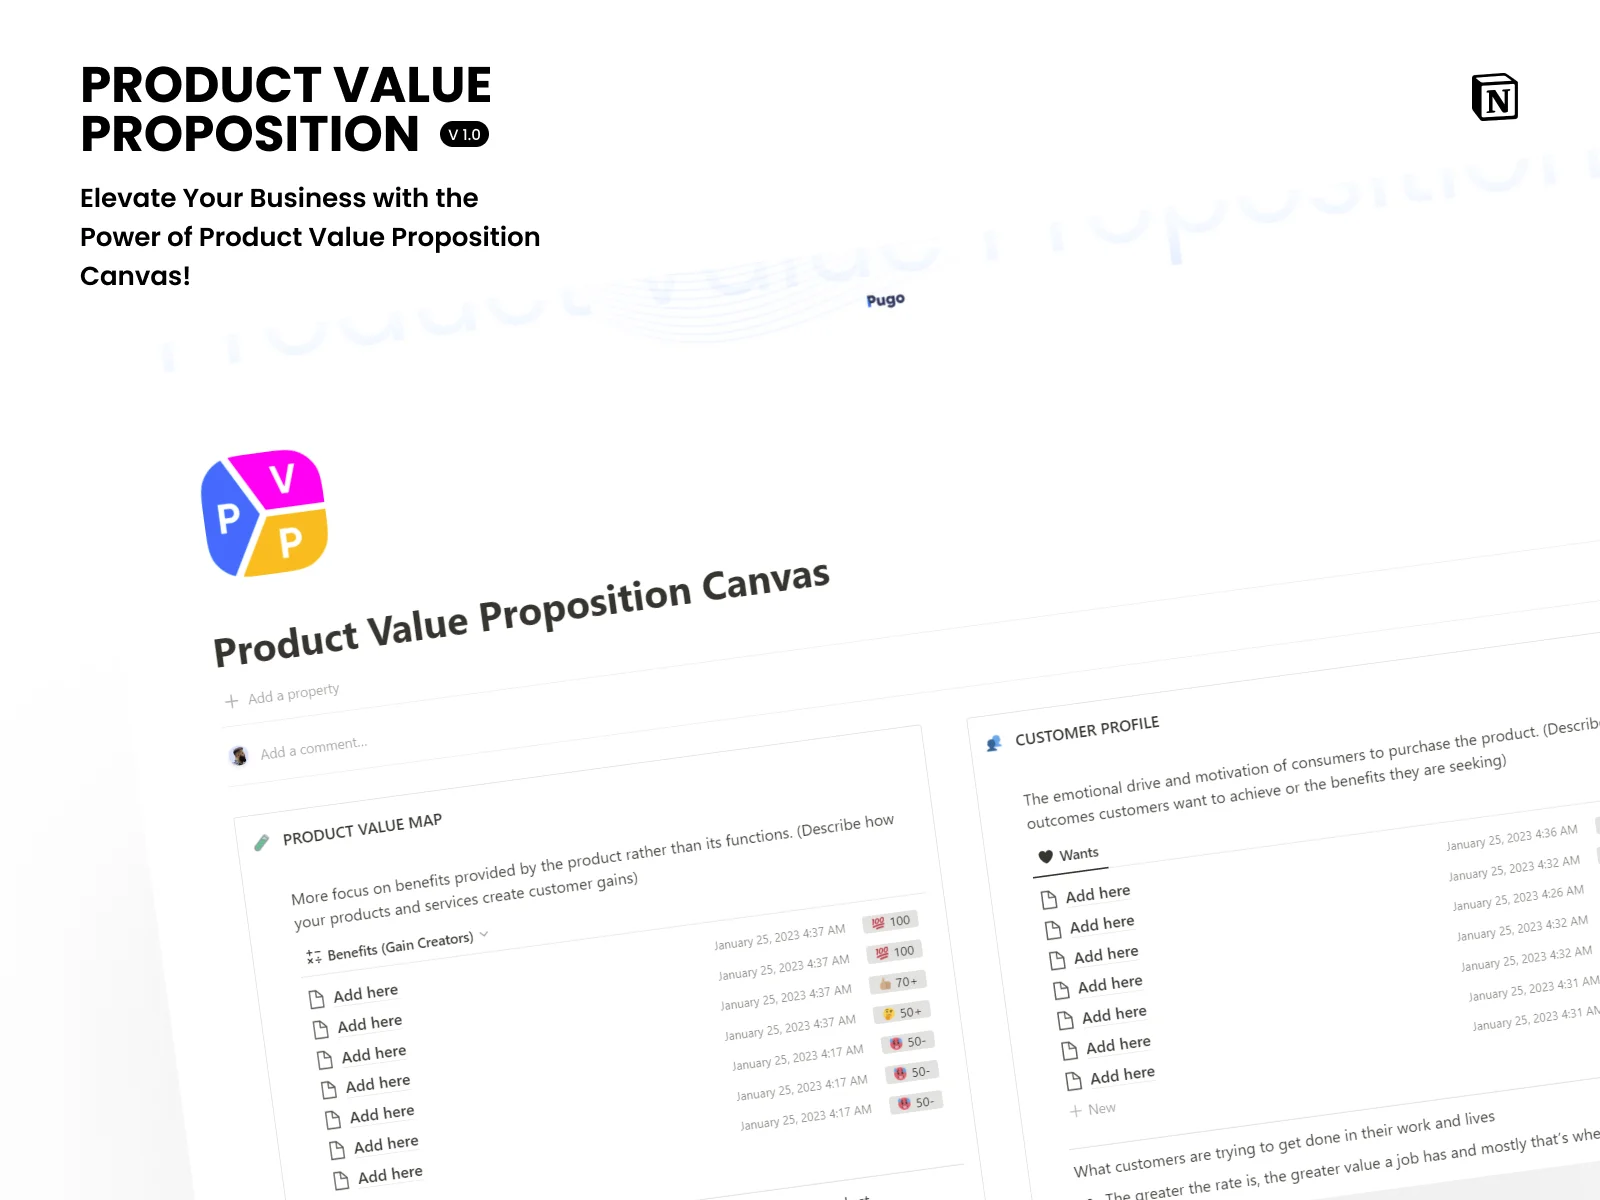 Product Value Proposition Canvas for Notion & Figma